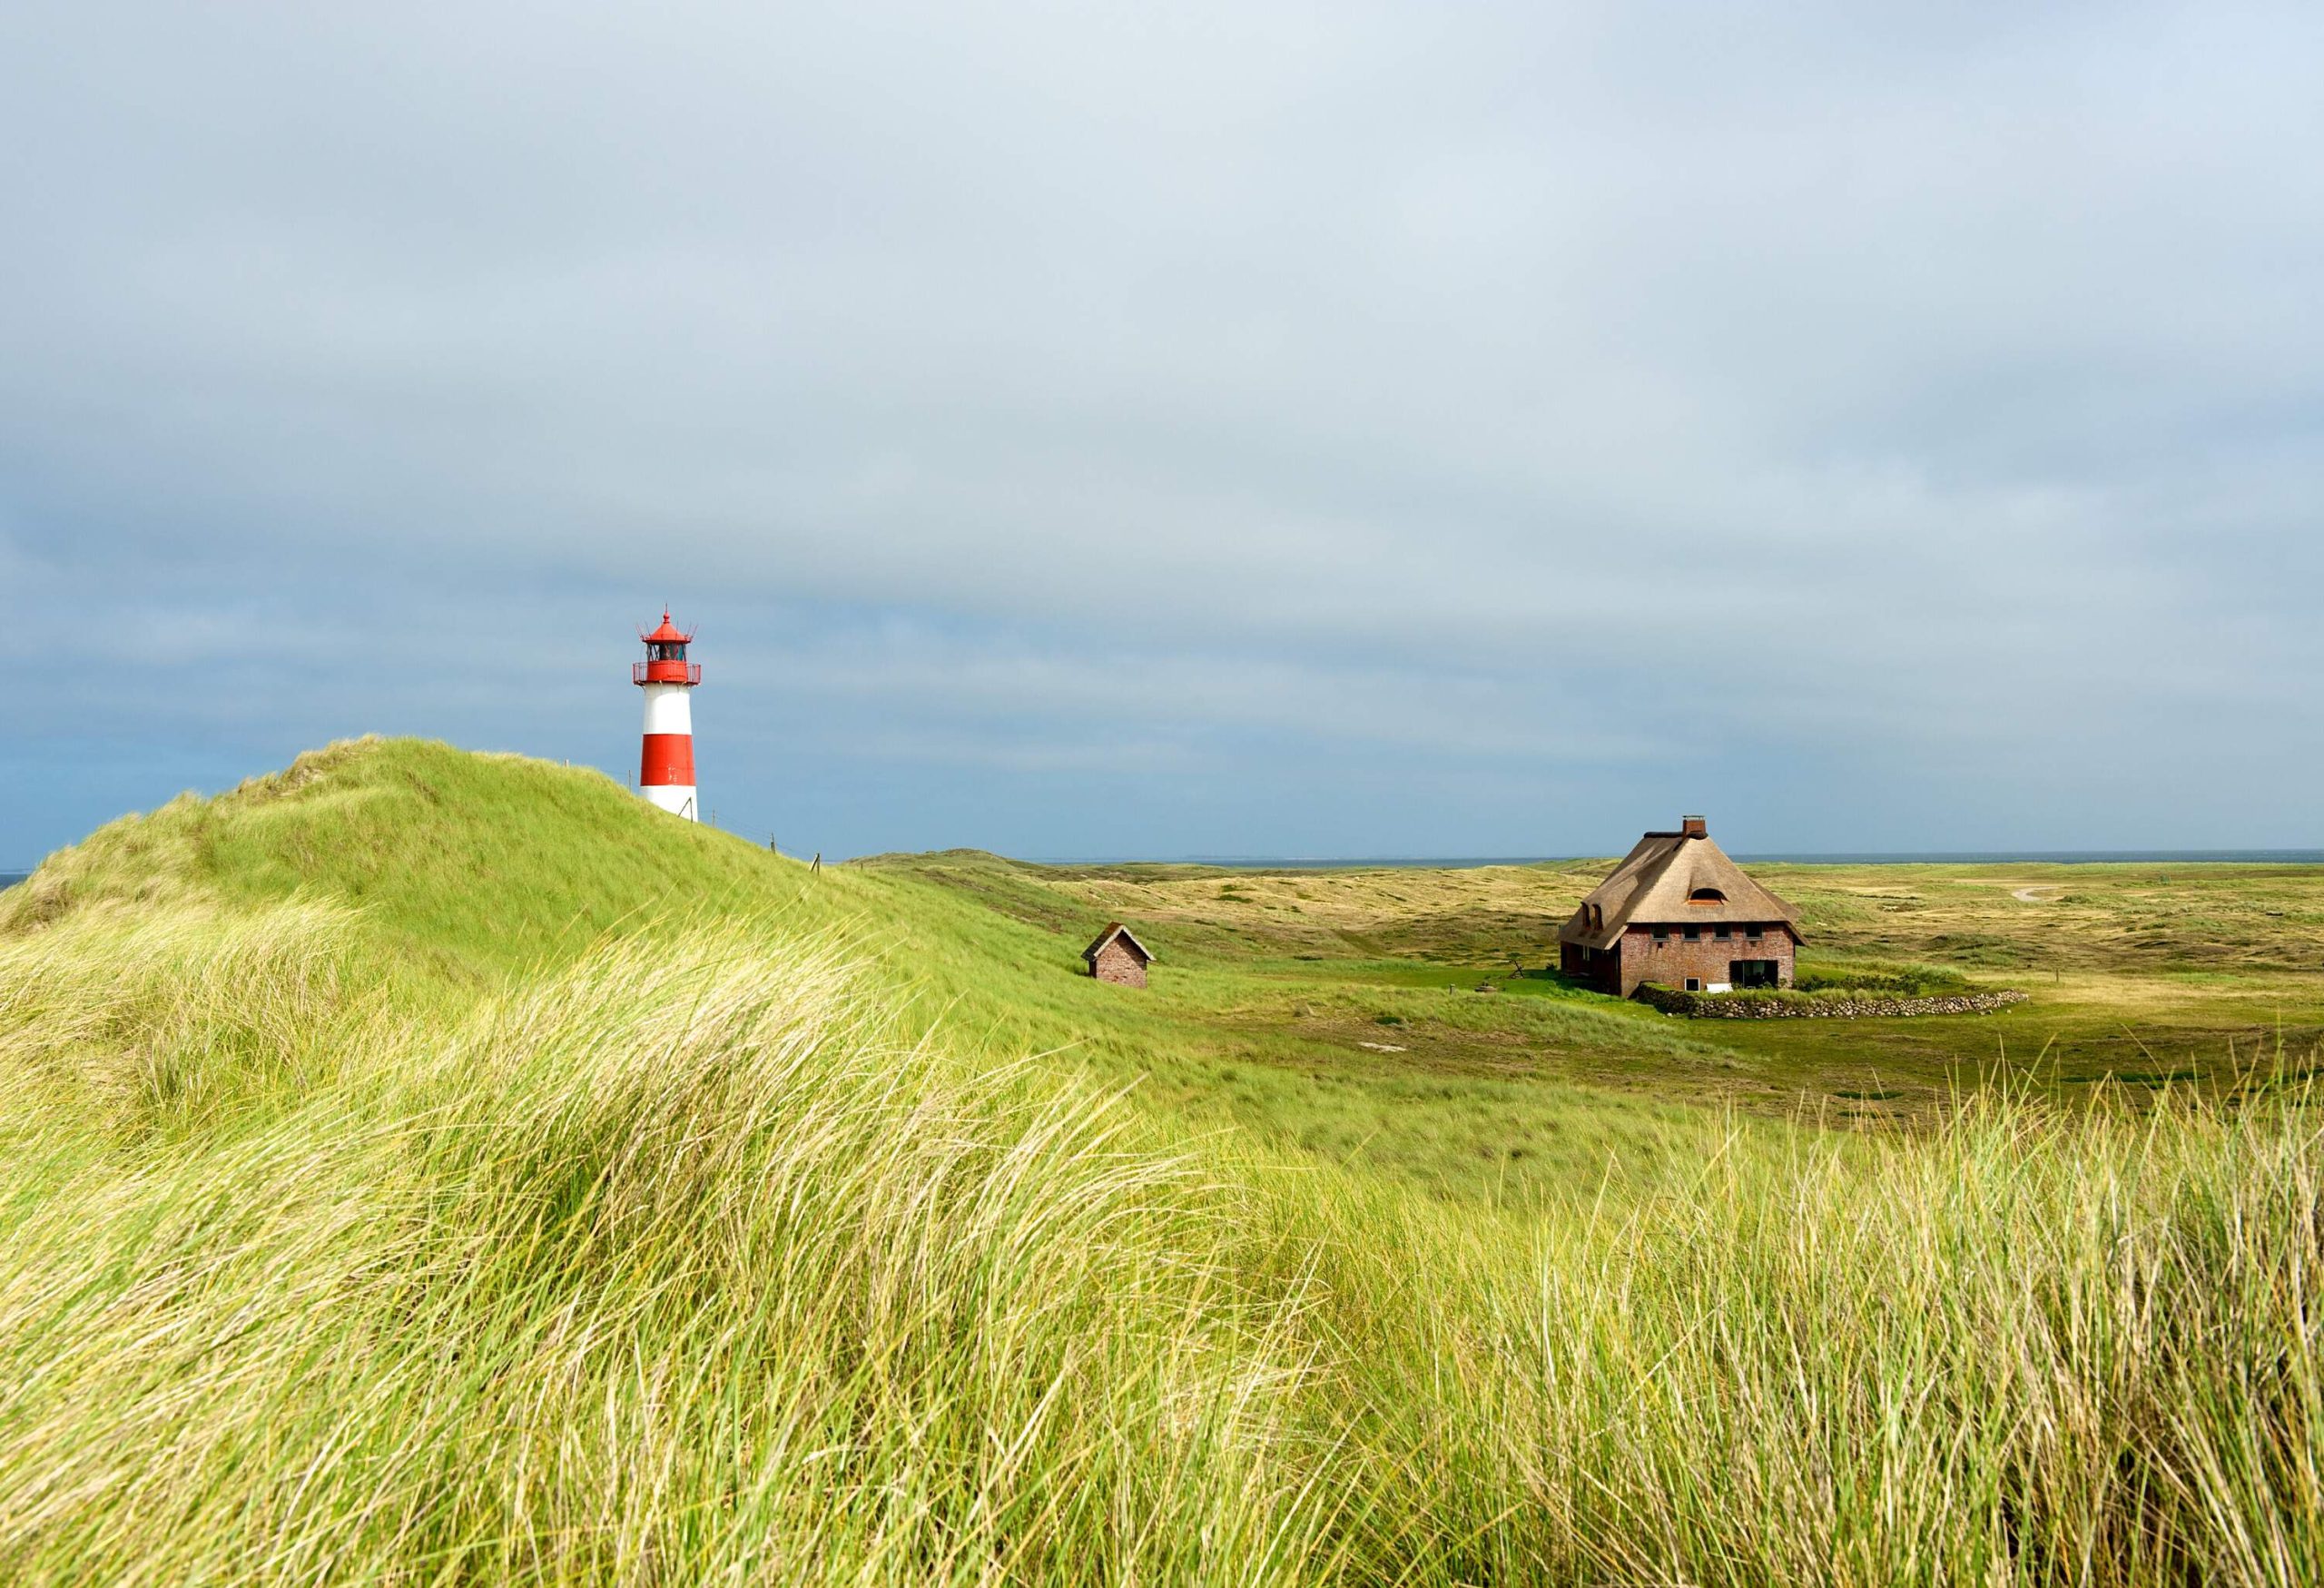 A grassy area with a solitary dwelling and a lighthouse.